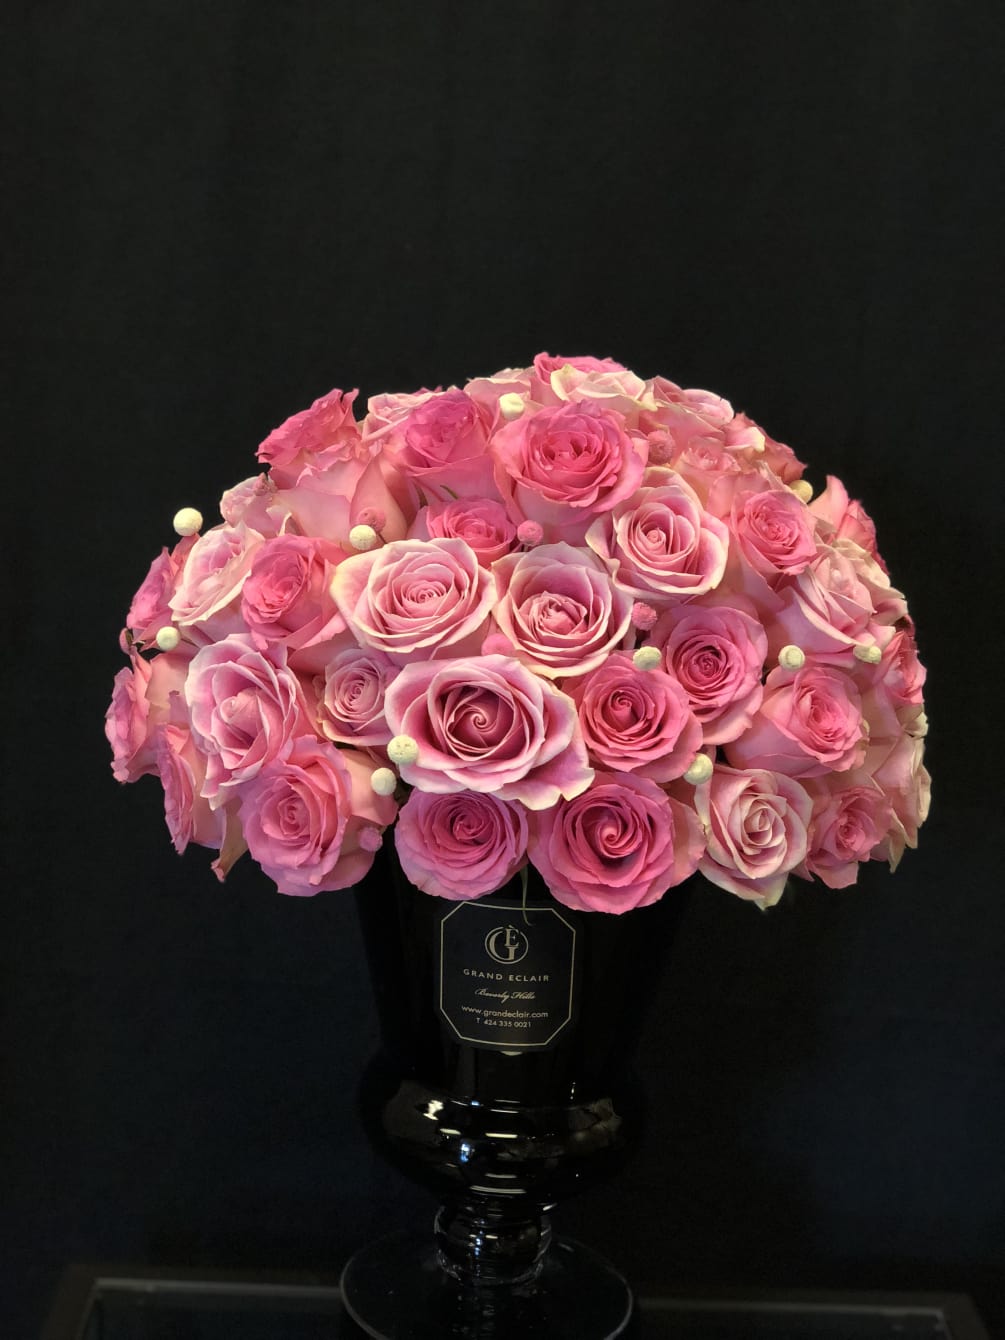 A full bouquet of lush roses to put a smile on any